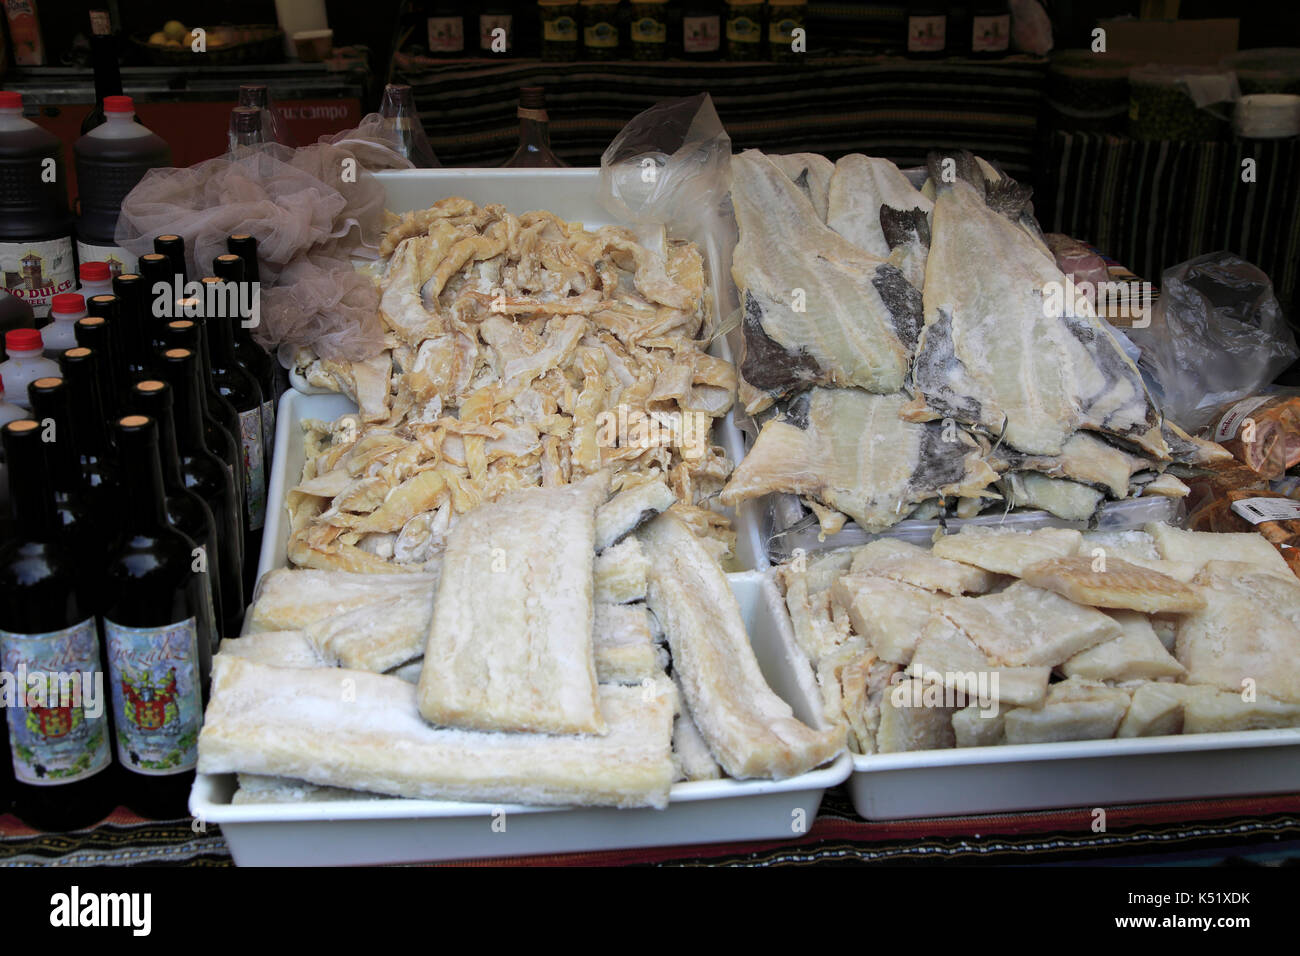 Display of fish dried salted cod products on market stall ...